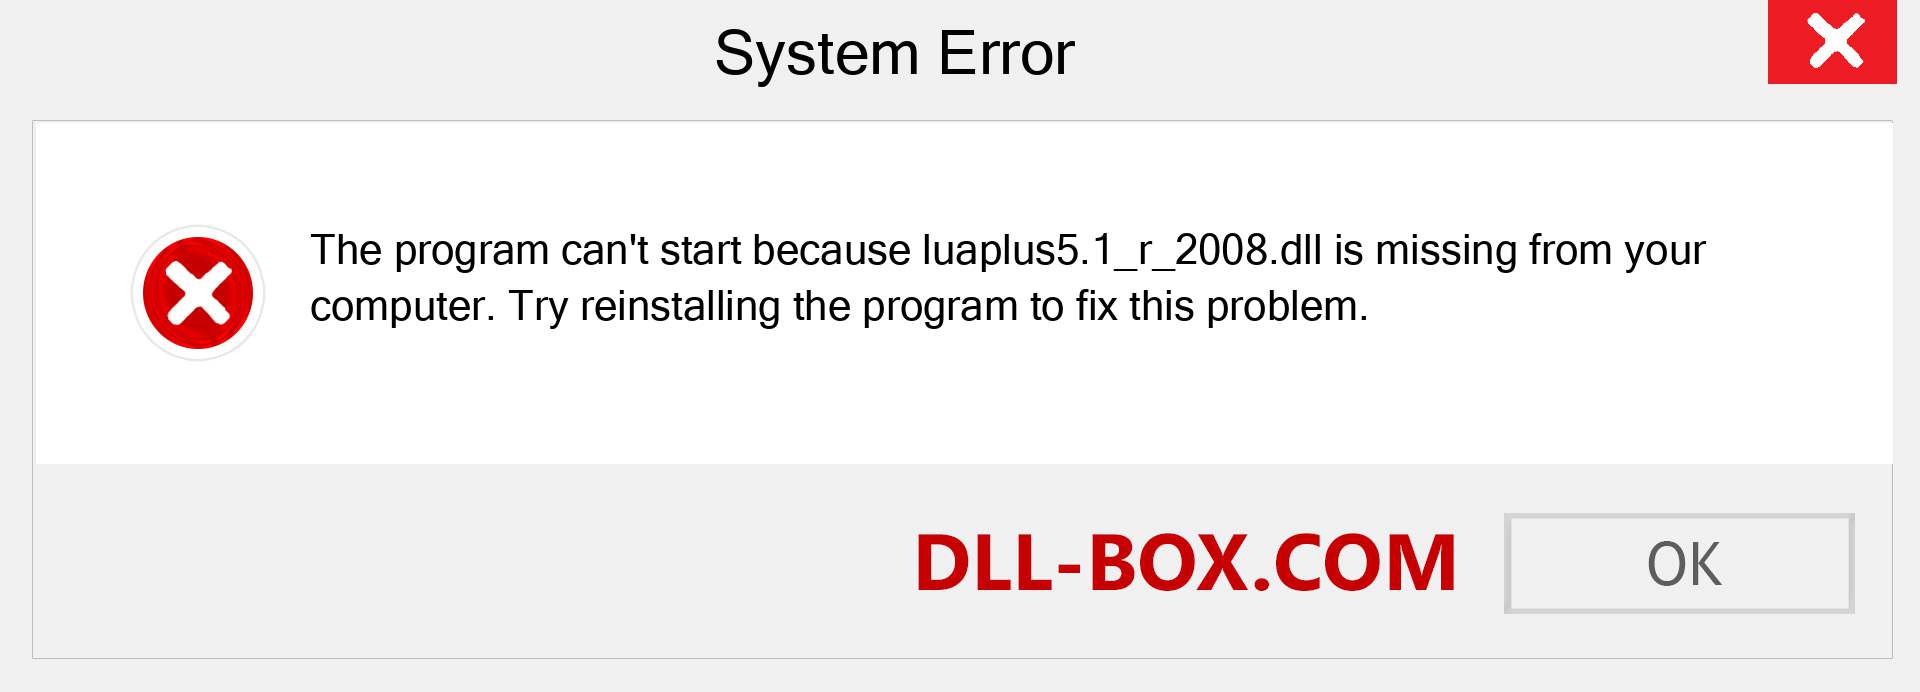  luaplus5.1_r_2008.dll file is missing?. Download for Windows 7, 8, 10 - Fix  luaplus5.1_r_2008 dll Missing Error on Windows, photos, images